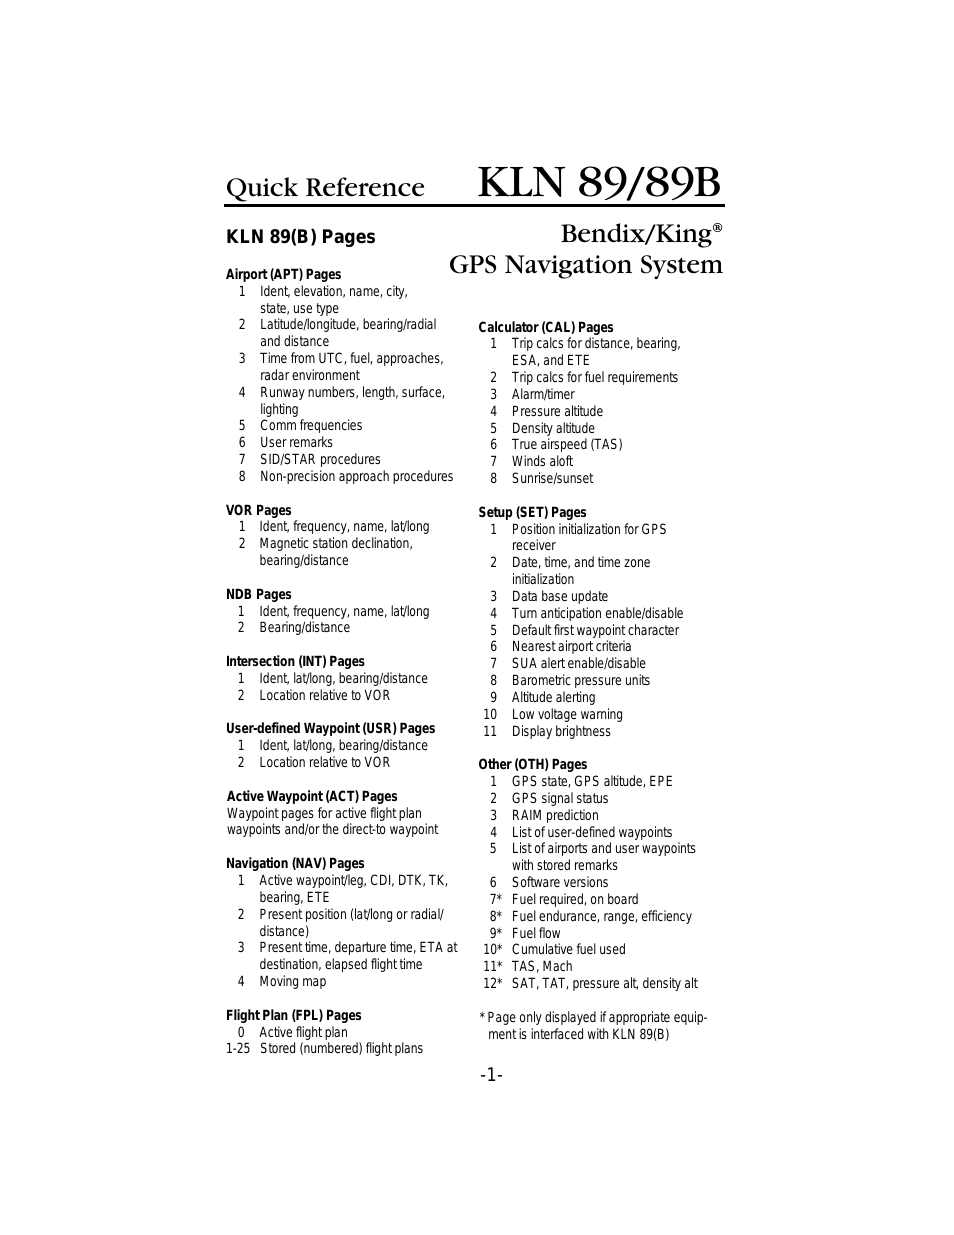 KLN 89 - Quick Reference Guide